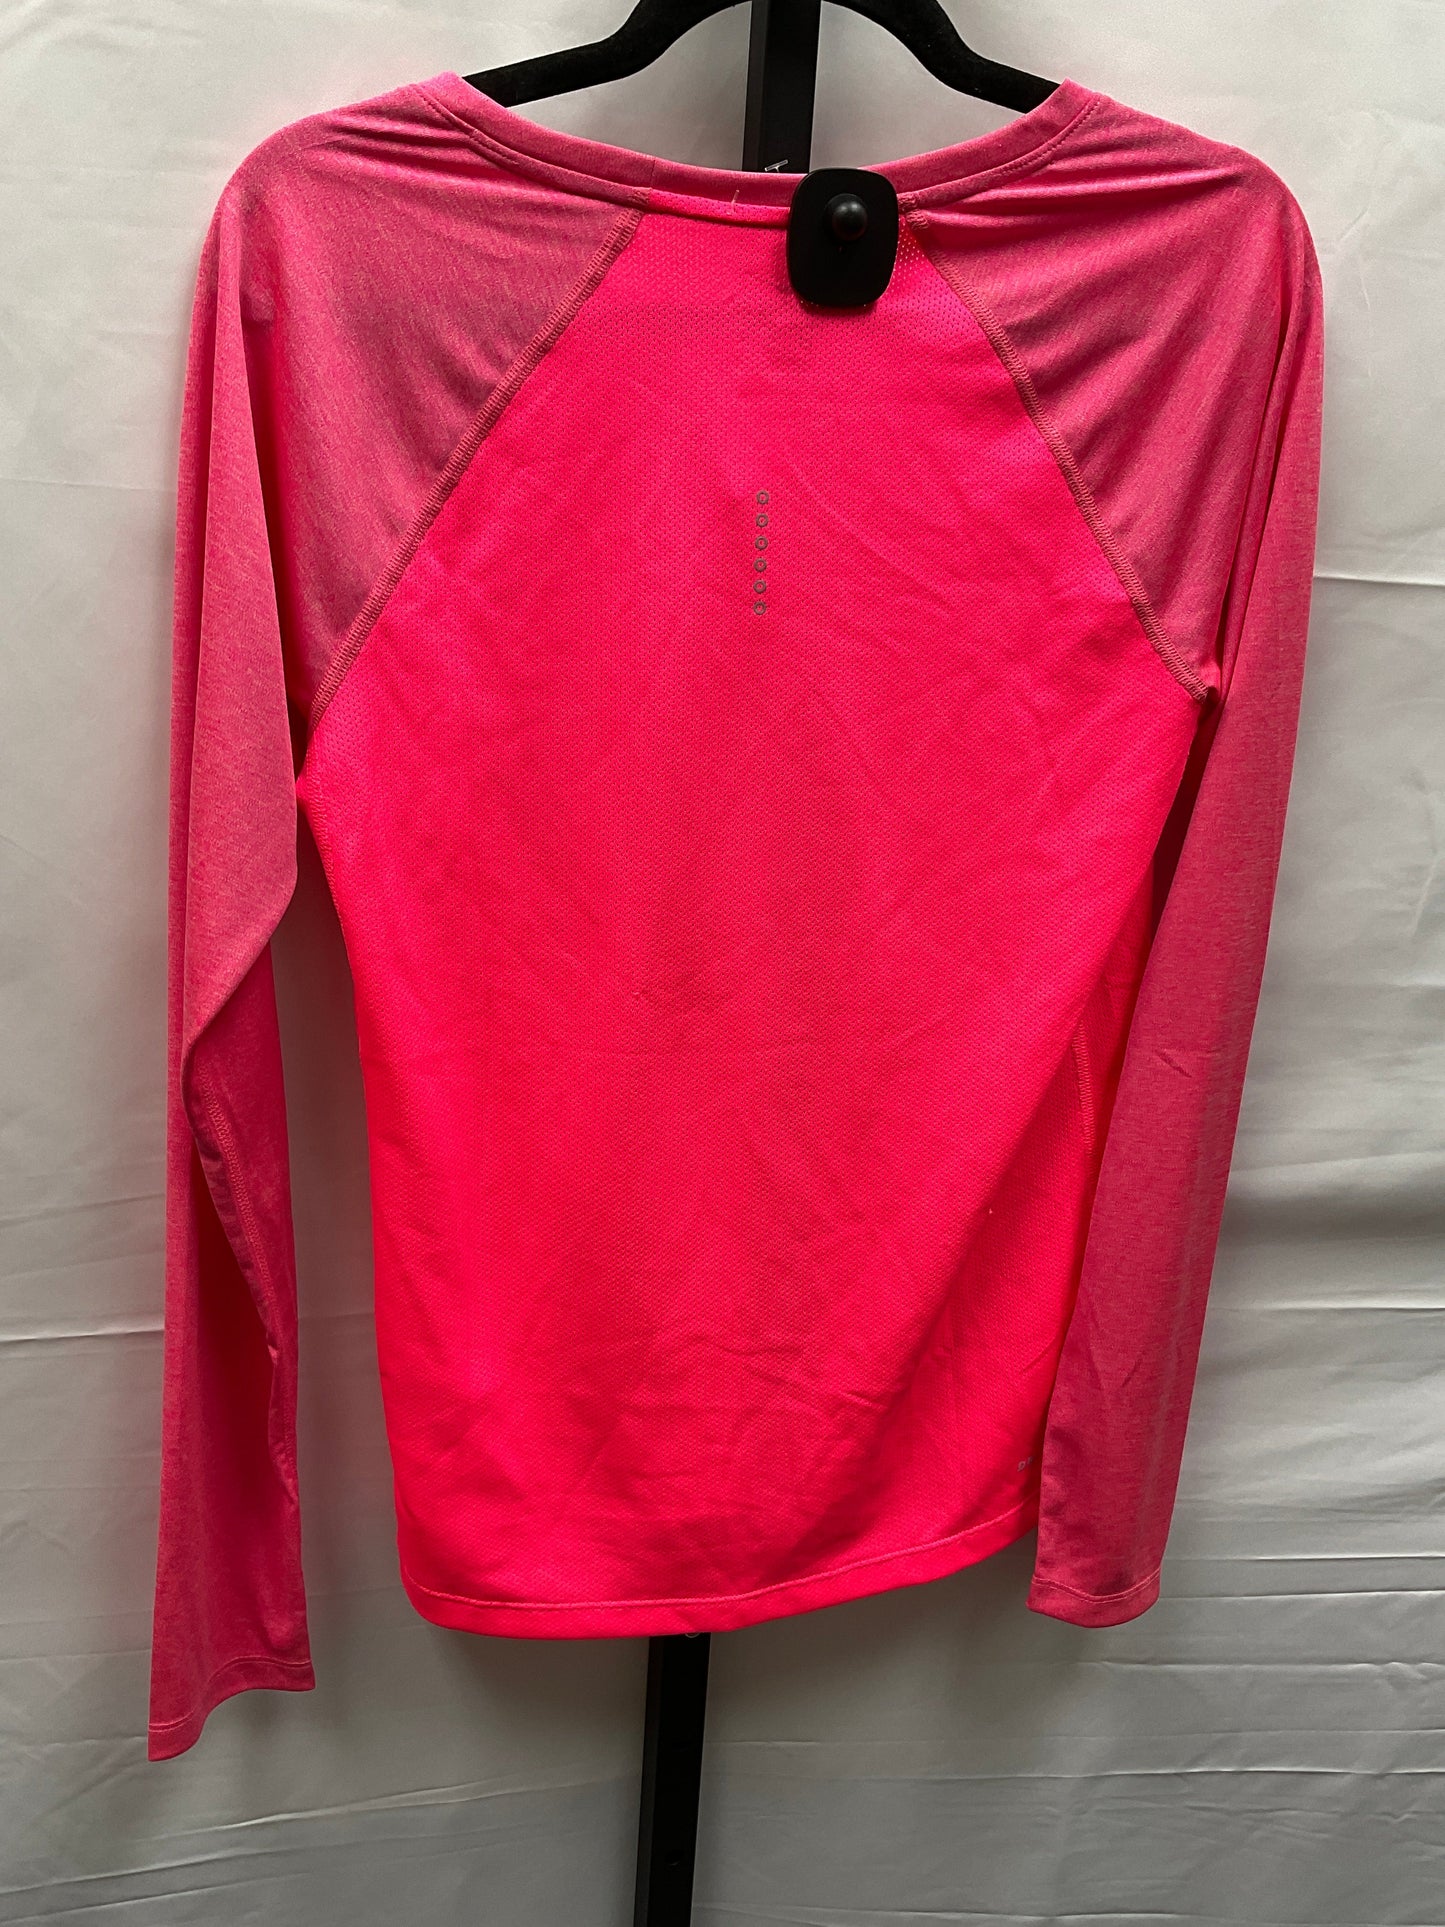 Pink Athletic Top Long Sleeve Crewneck Nike Apparel, Size M